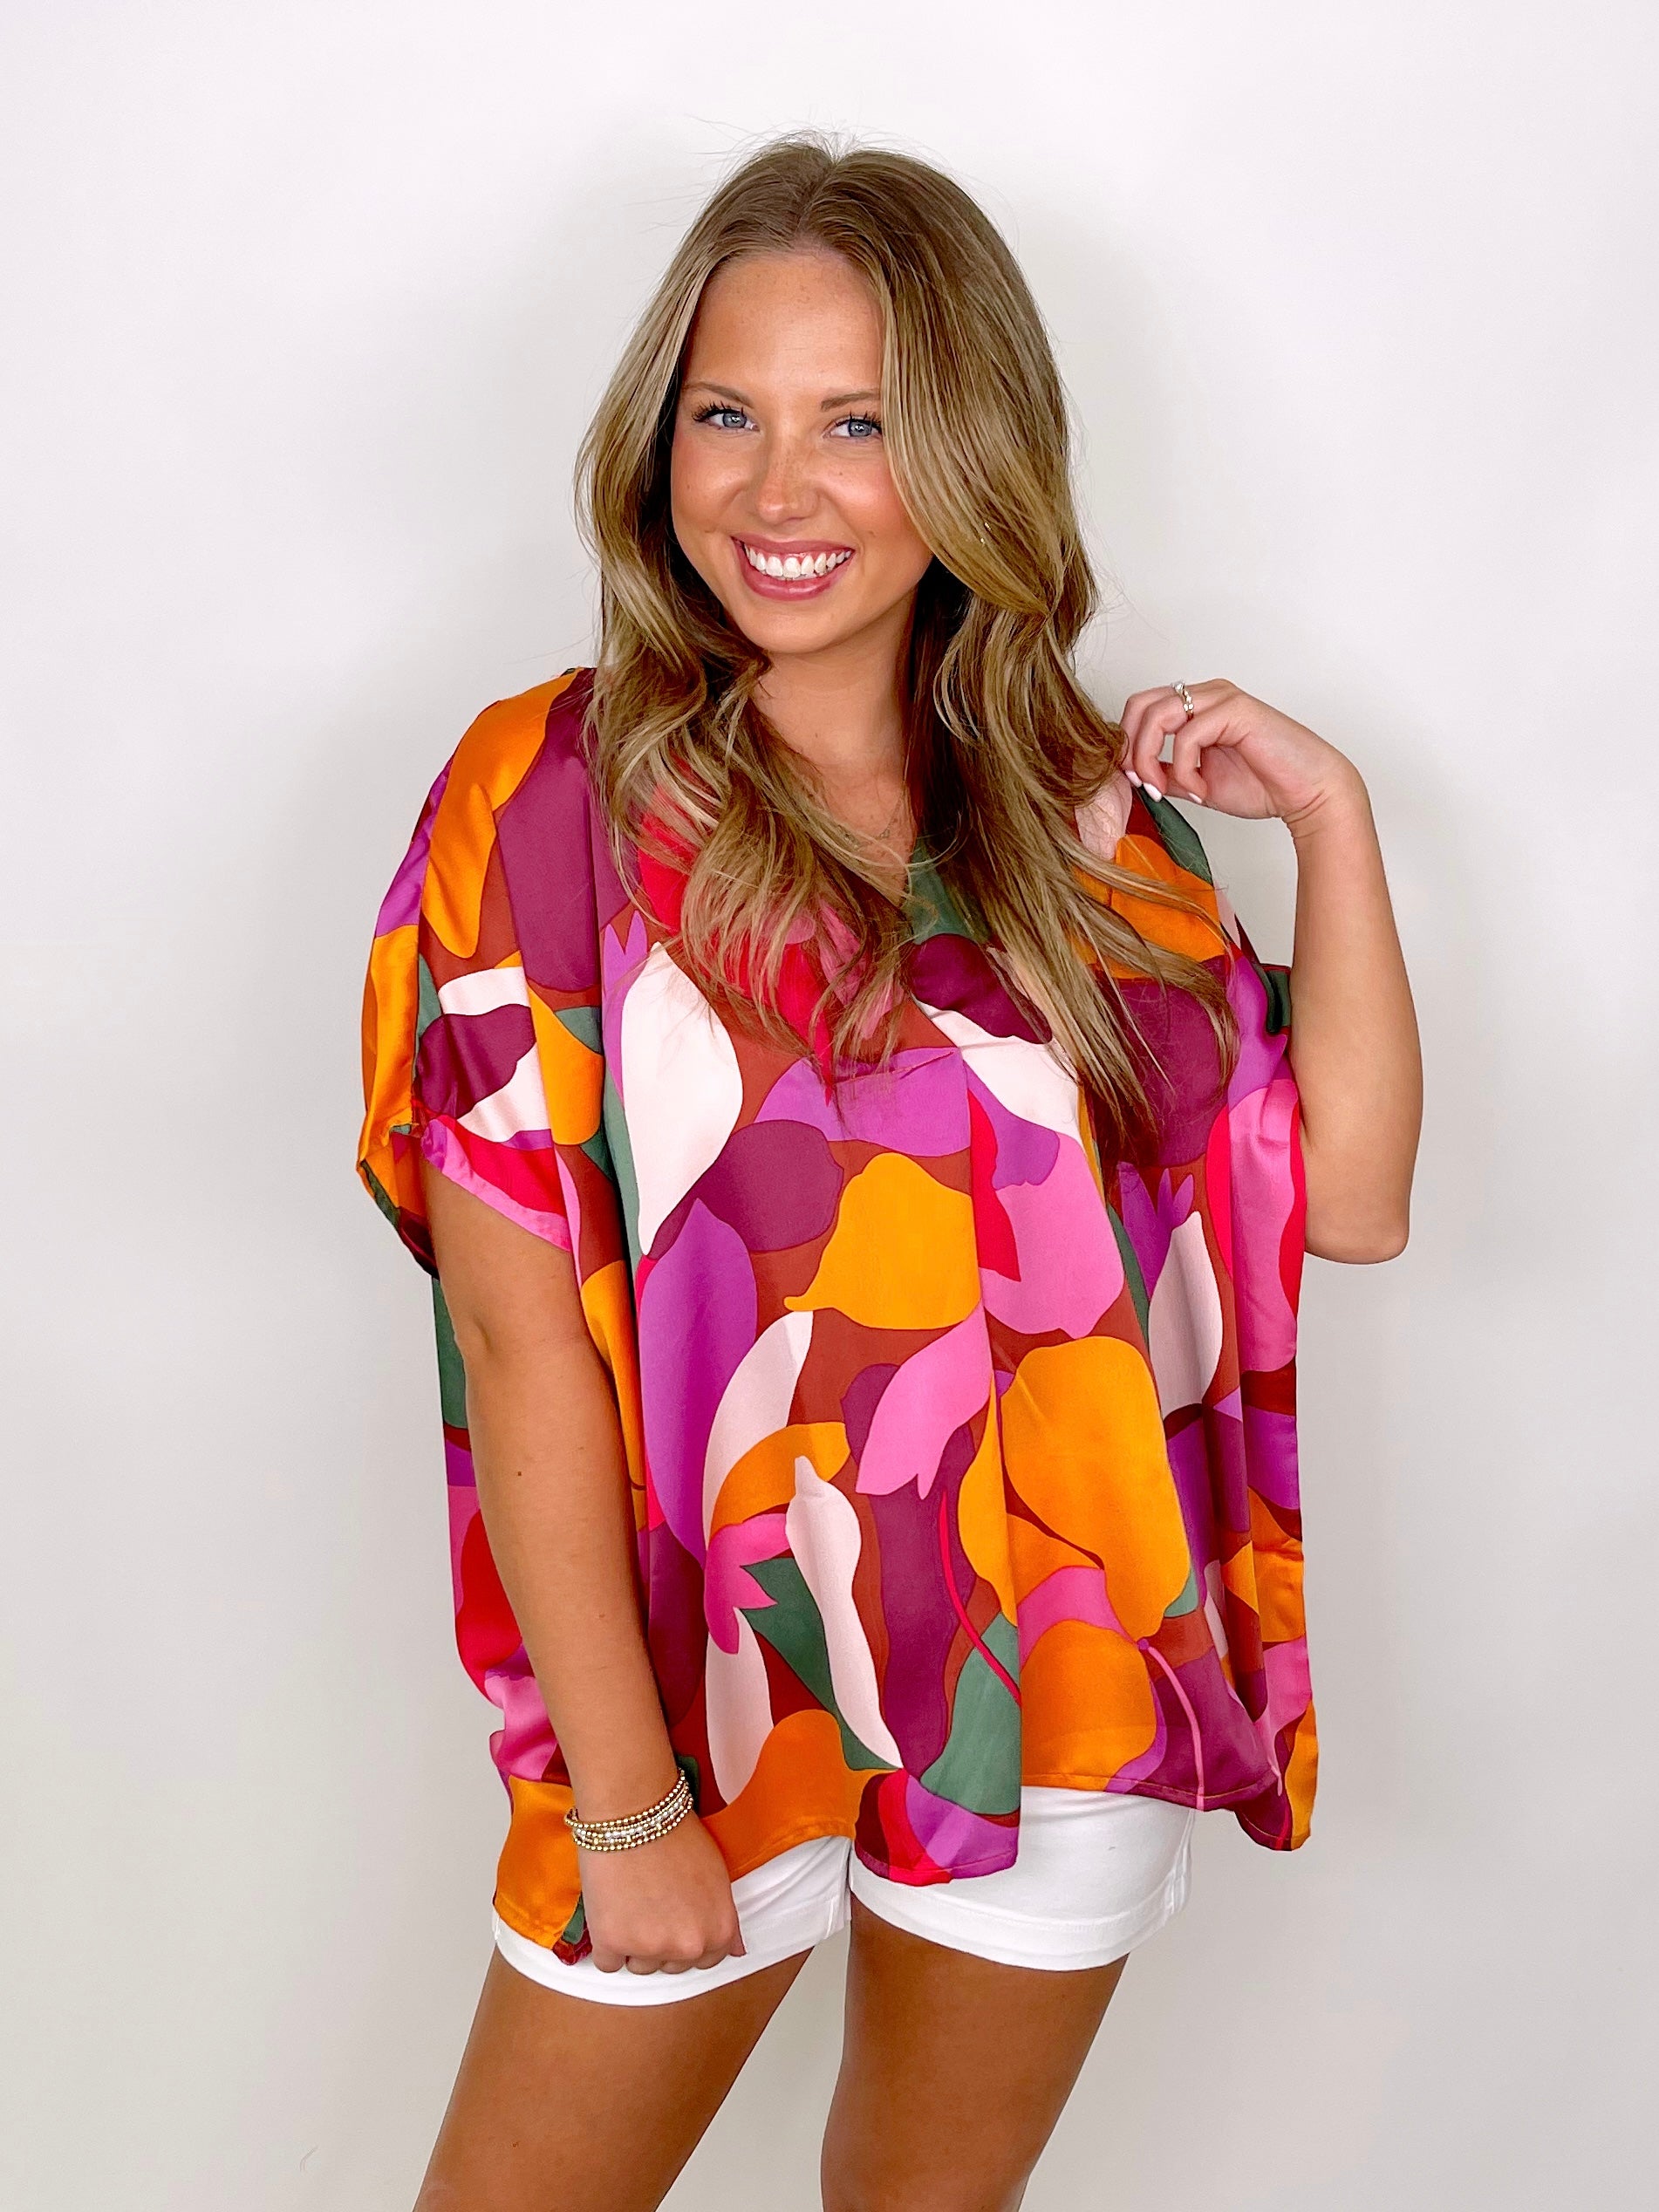 Retro Blooming Blouse-Short Sleeves-Entro-The Village Shoppe, Women’s Fashion Boutique, Shop Online and In Store - Located in Muscle Shoals, AL.